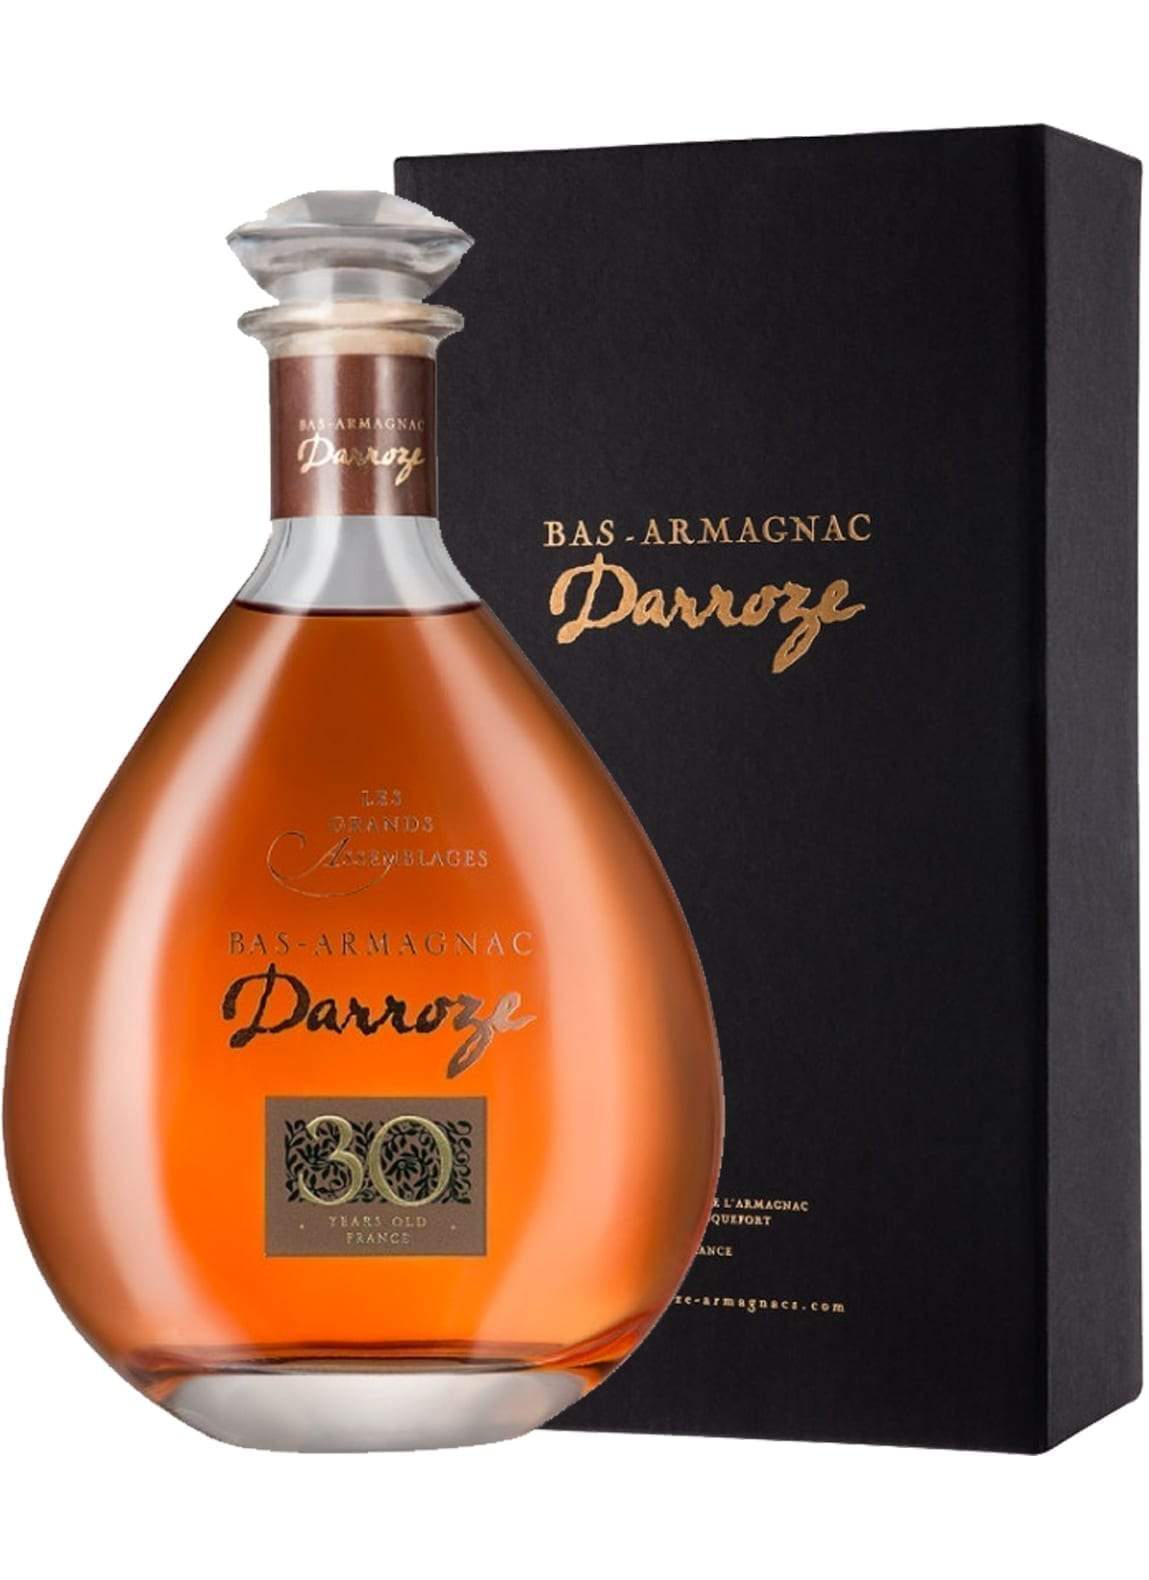 Darroze Grand Bas Armagnac Les Grands Assemblages 30 years Carafe 43% 700ml | Brandy | Shop online at Spirits of France